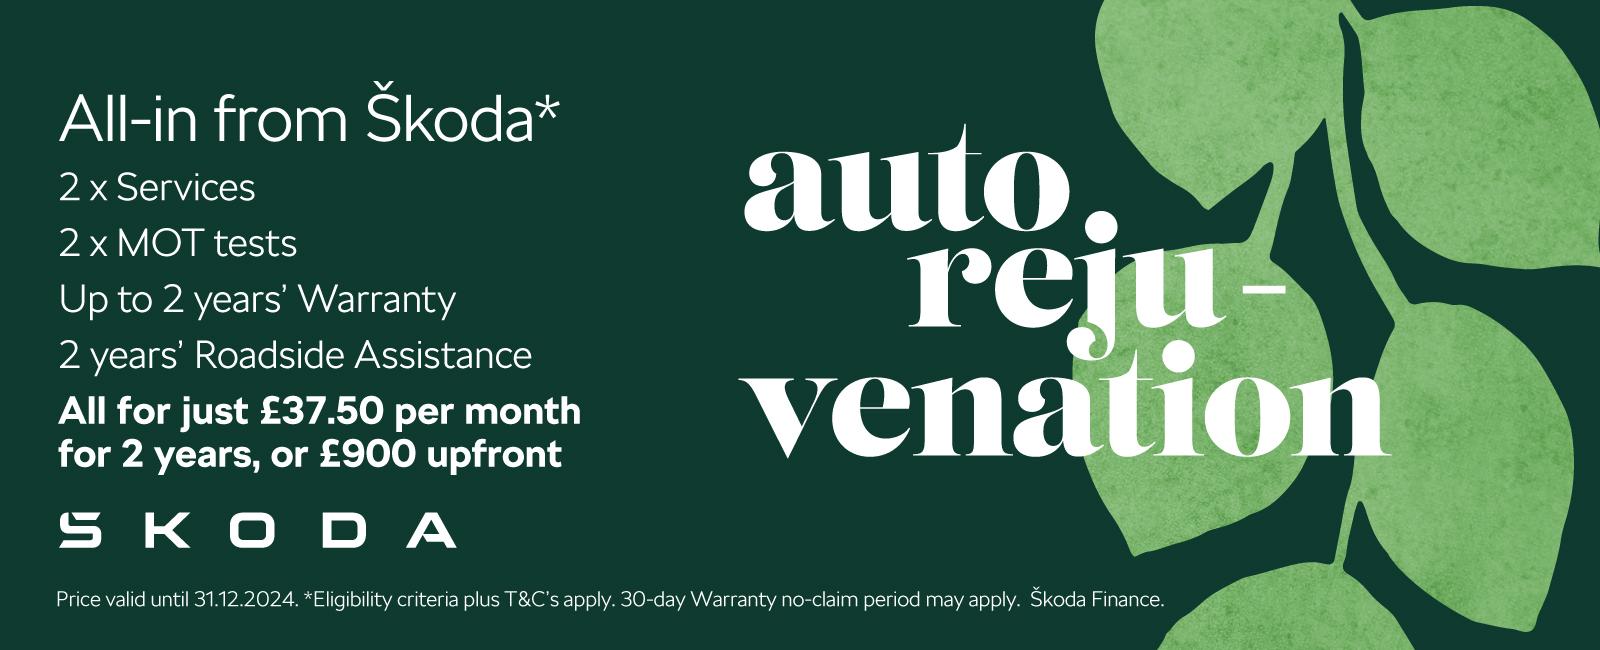 All-in From Škoda Just £37.50 Per Month